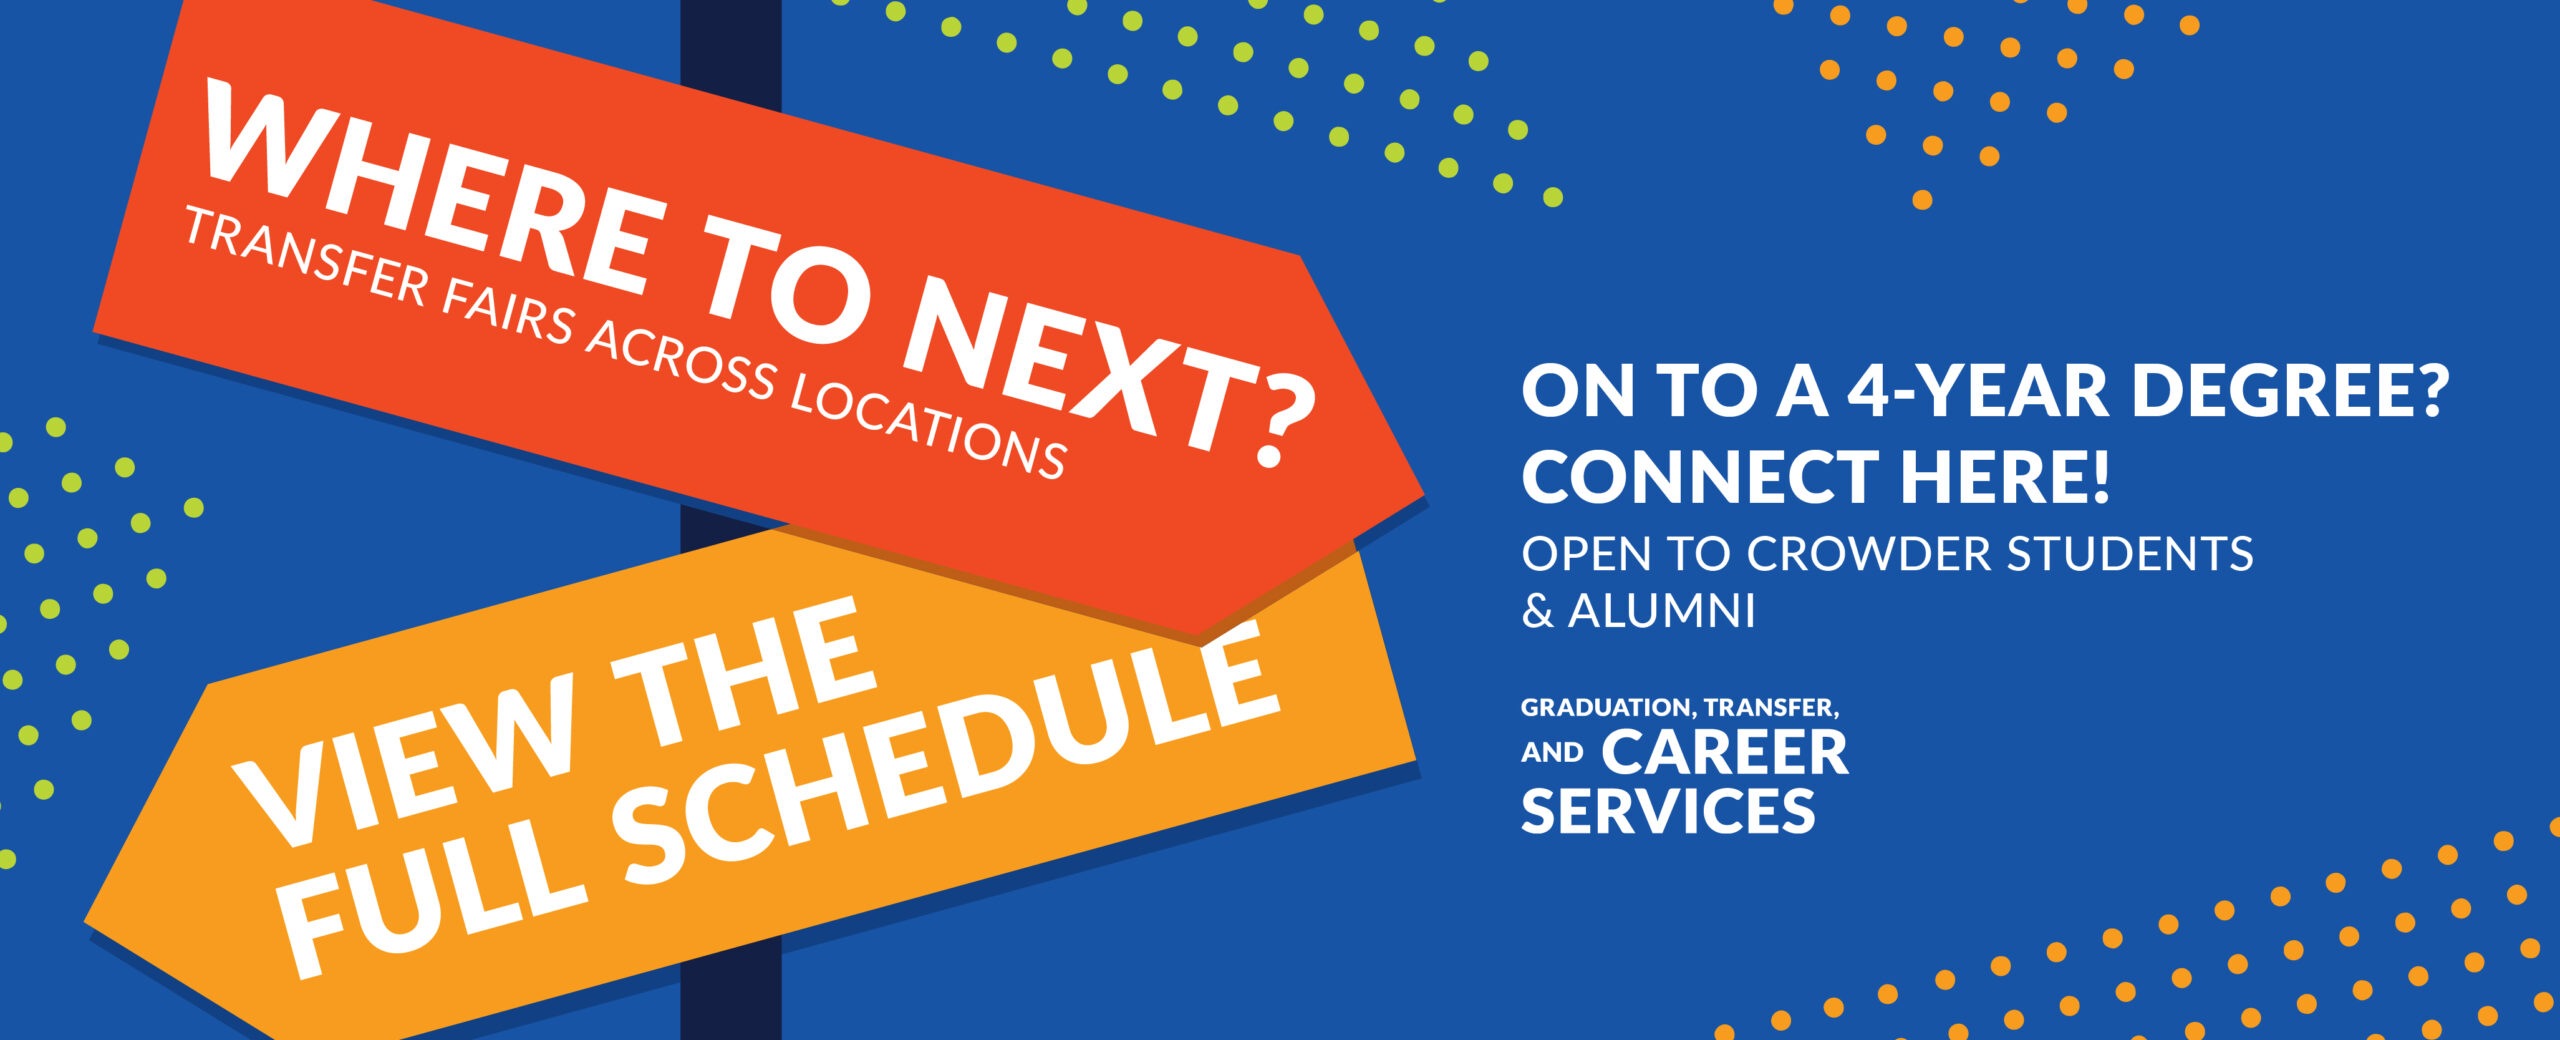 Where to next? Transfer Fairs across locations. View the full schedule. On to a 4-year degree? Connect here! Open to Crowder Students & Alumni